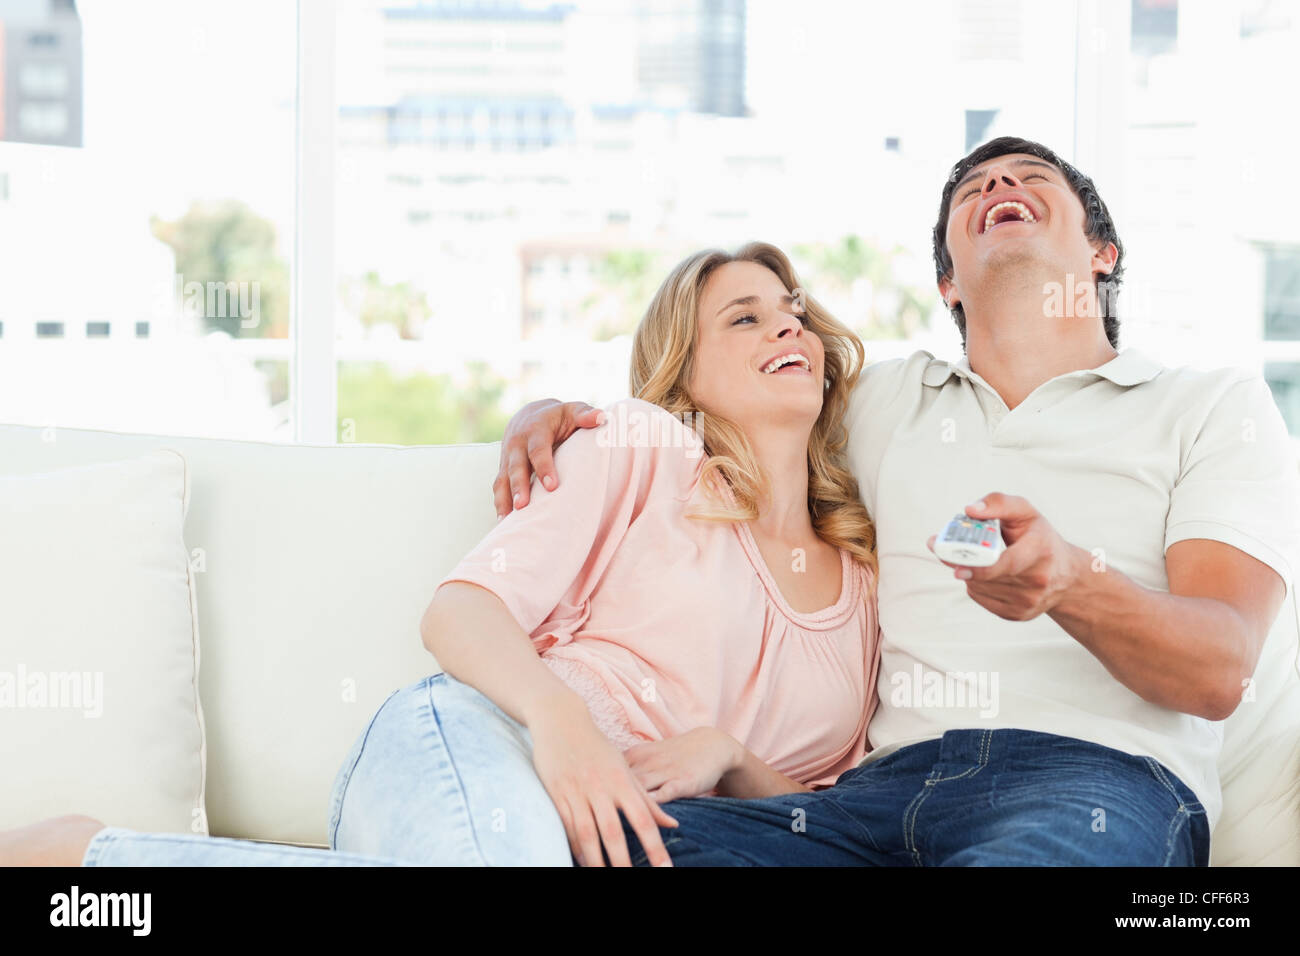 Man and woman on the couch laughing at the tv programme Stock Photo